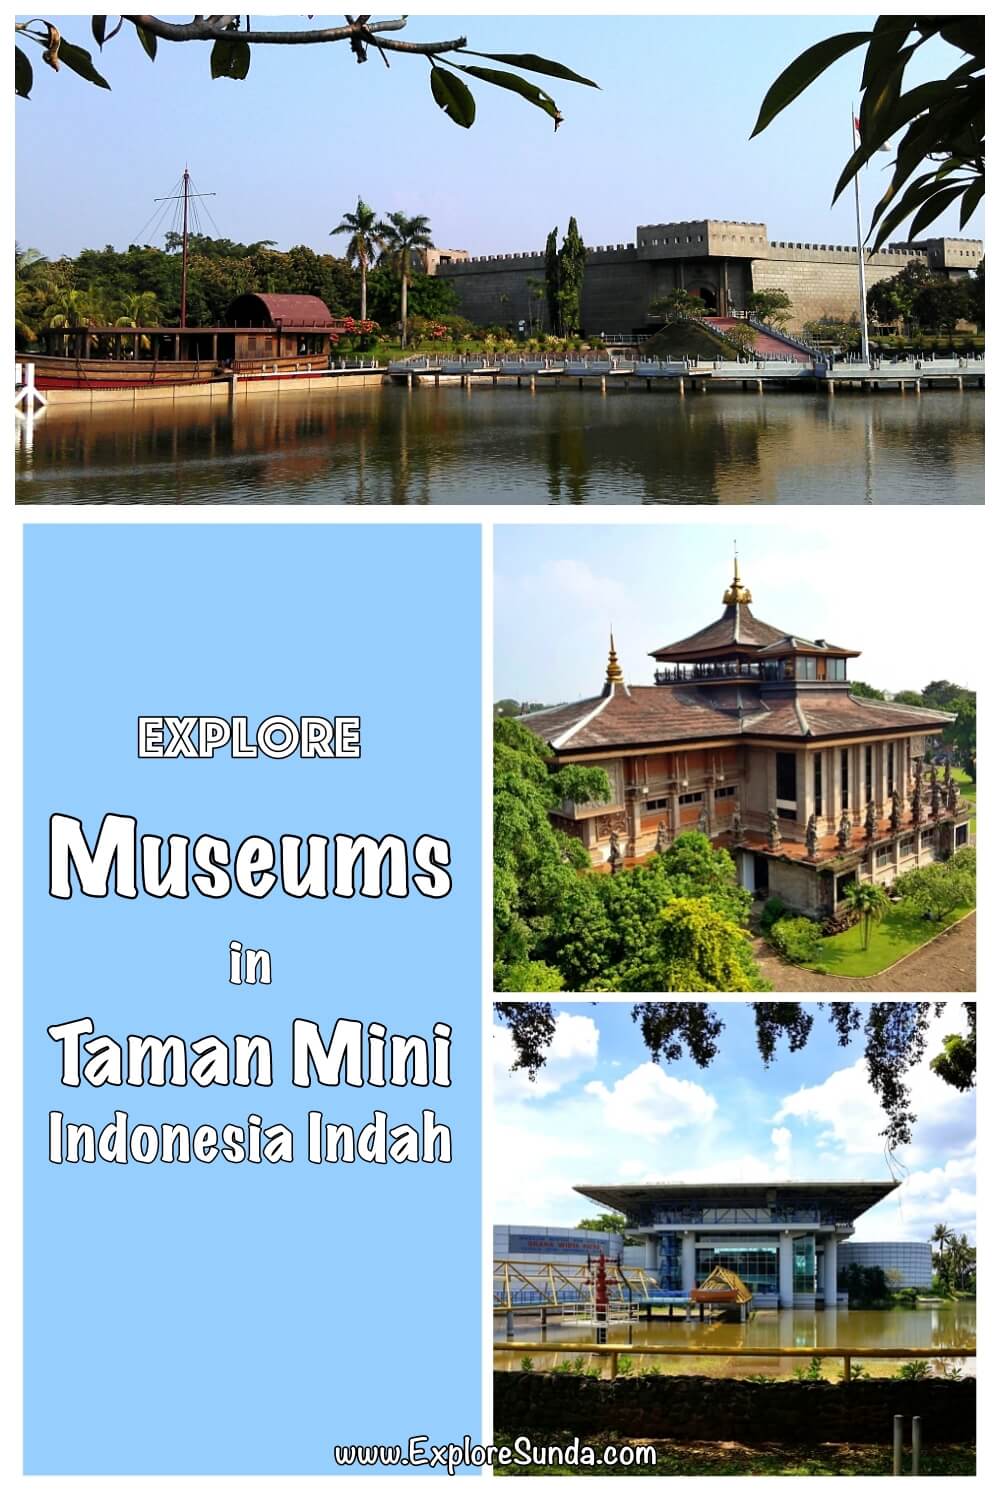 Explore the 18 museums in Taman Mini Indonesia Indah [TMII], from fauna, cultures to science!